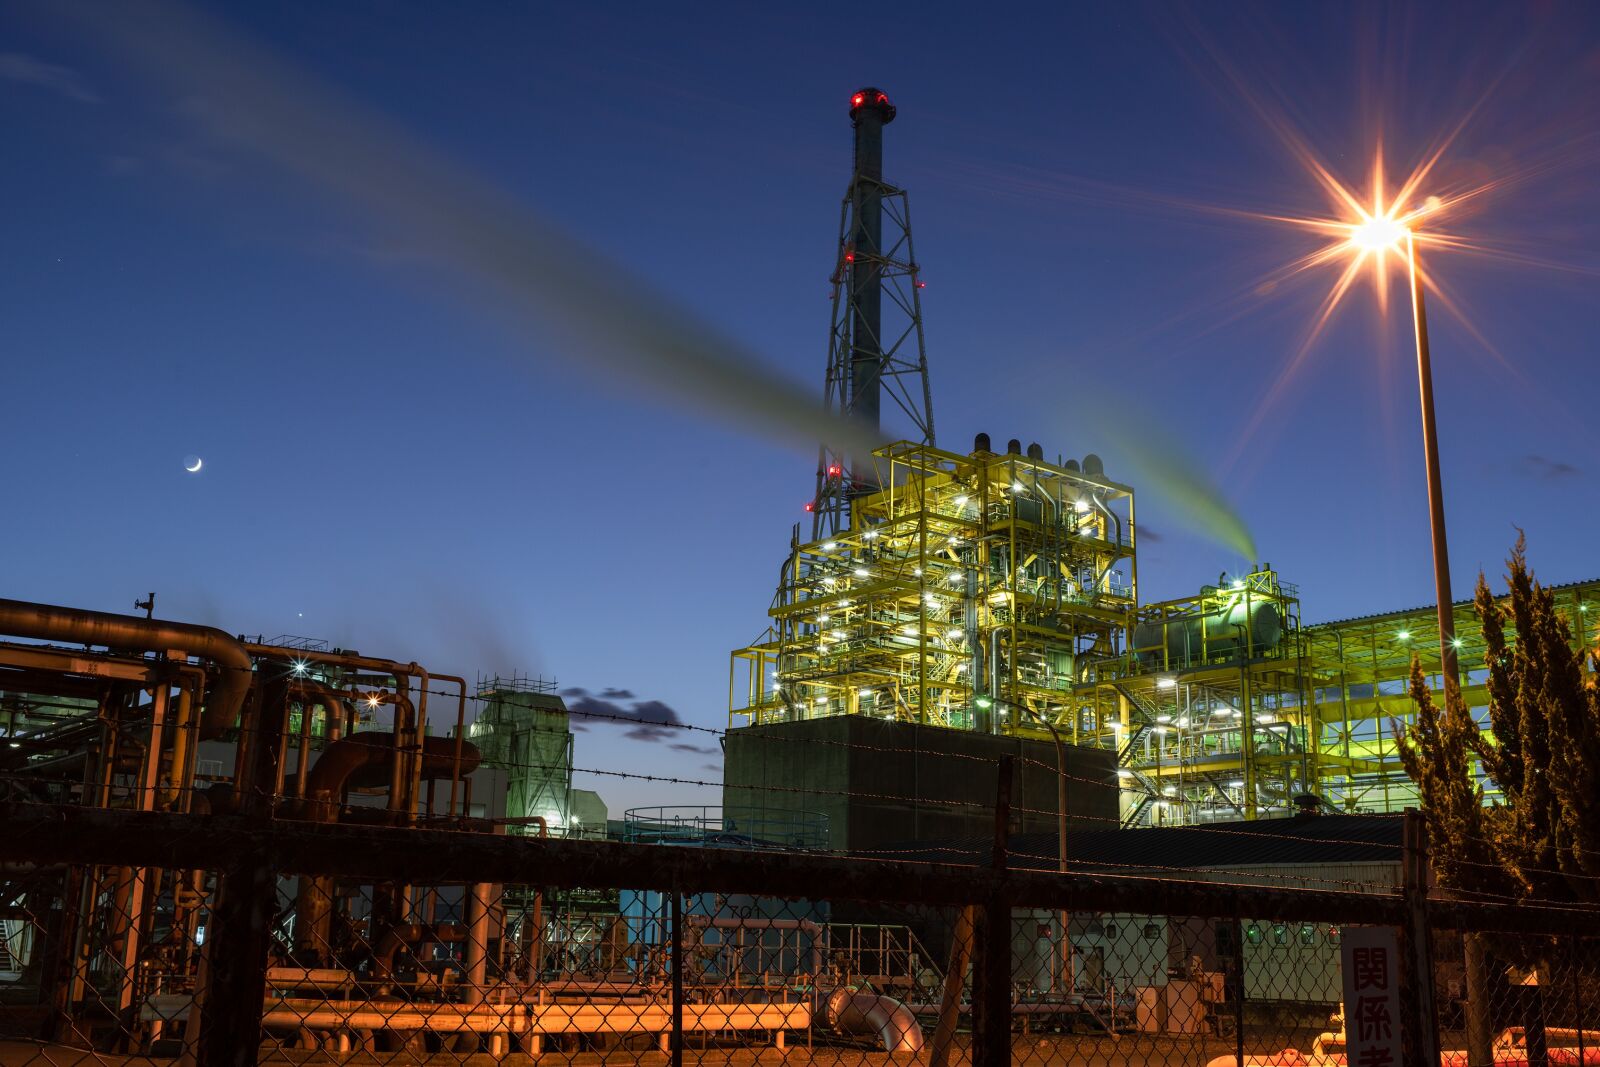 Sony a7R IV sample photo. Night view, factory, oil-related photography